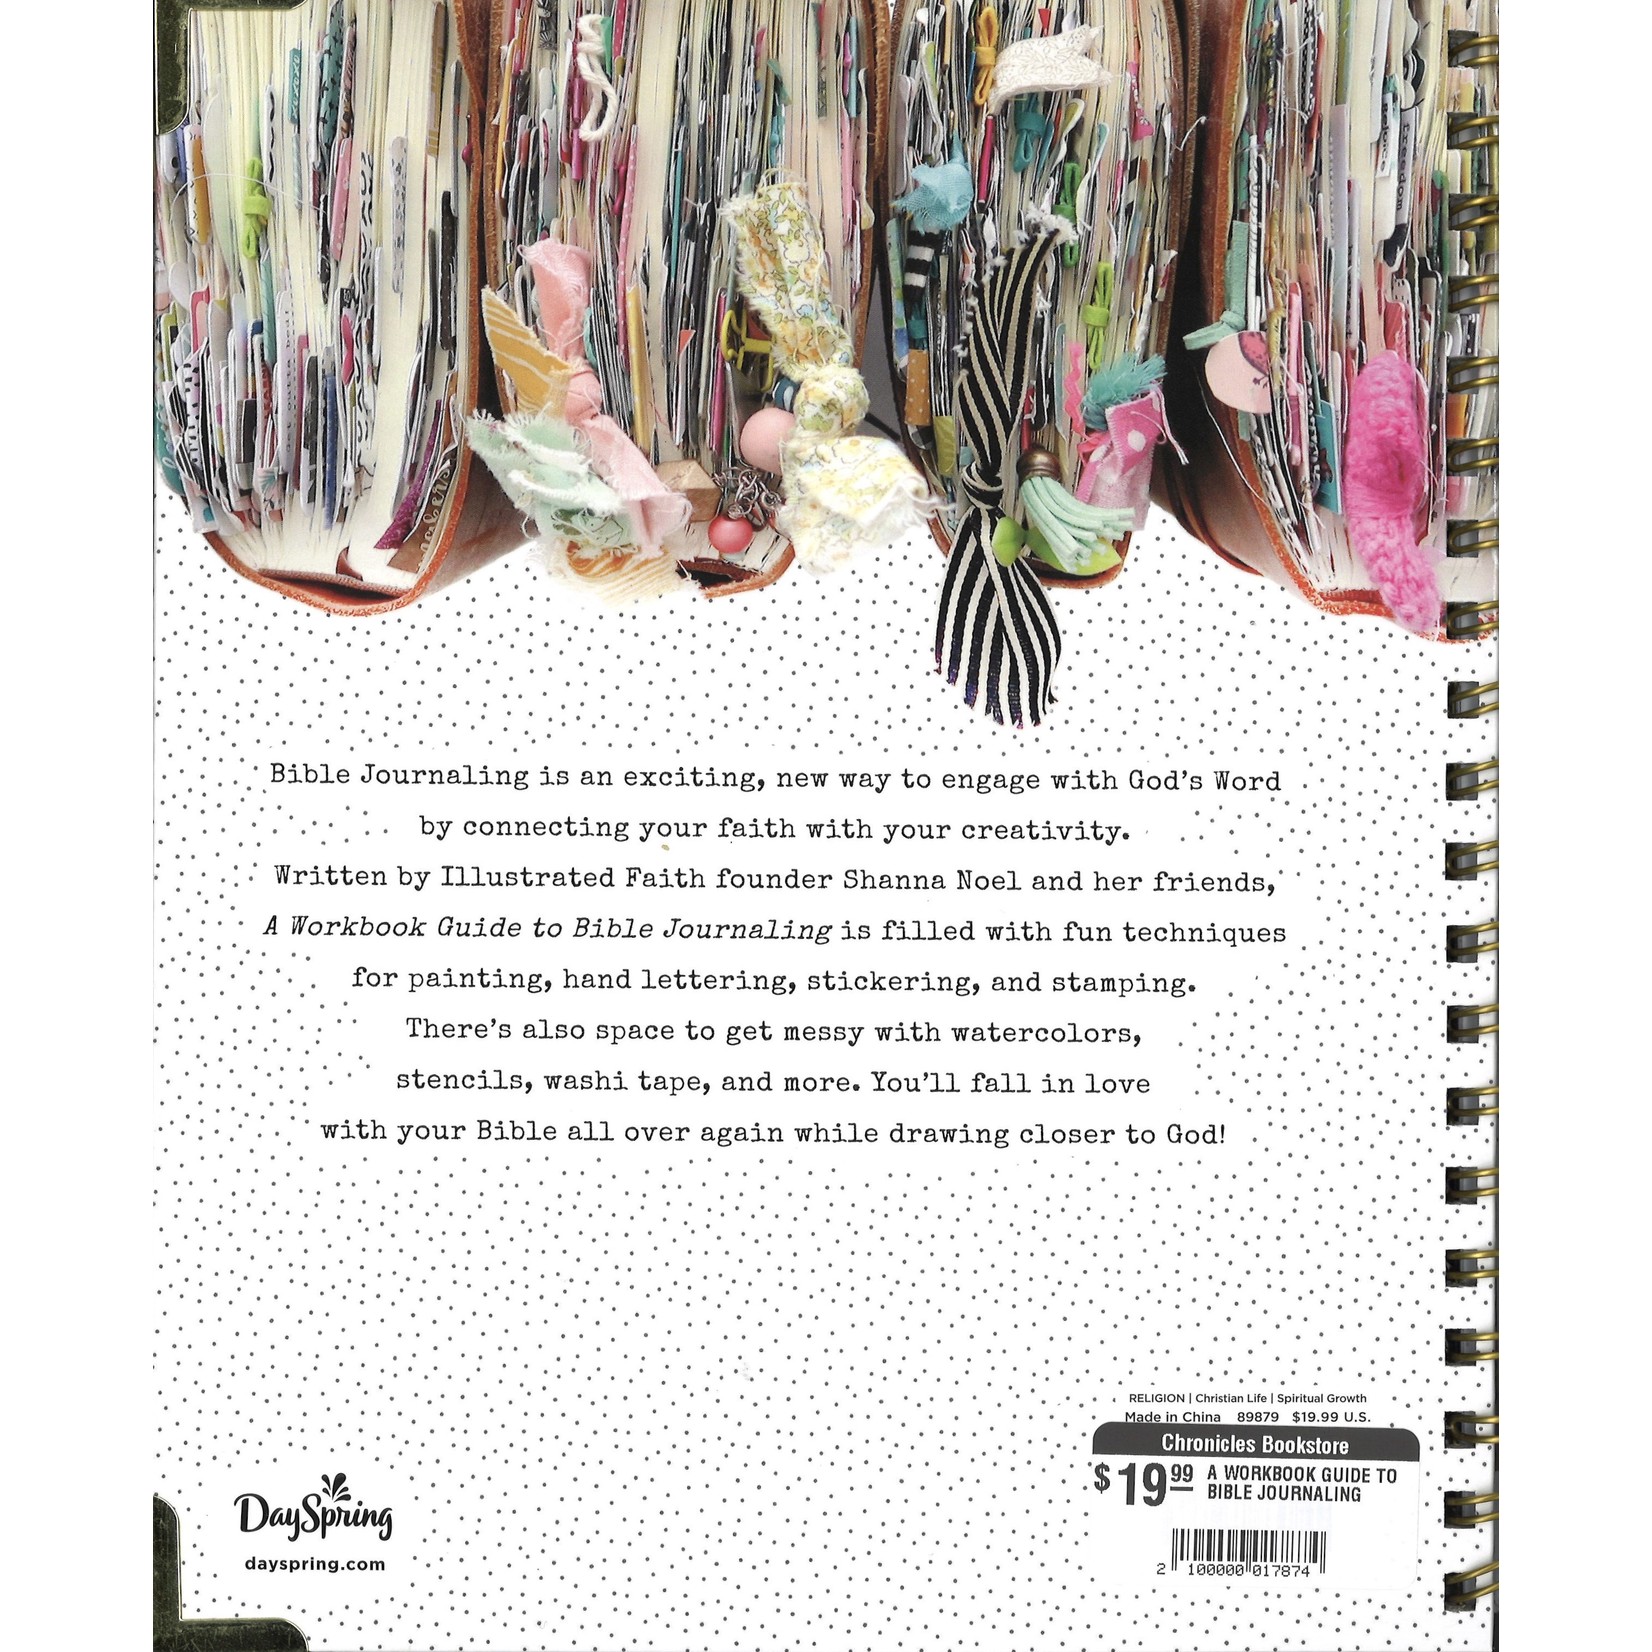 A WORKBOOK GUIDE TO BIBLE JOURNALING